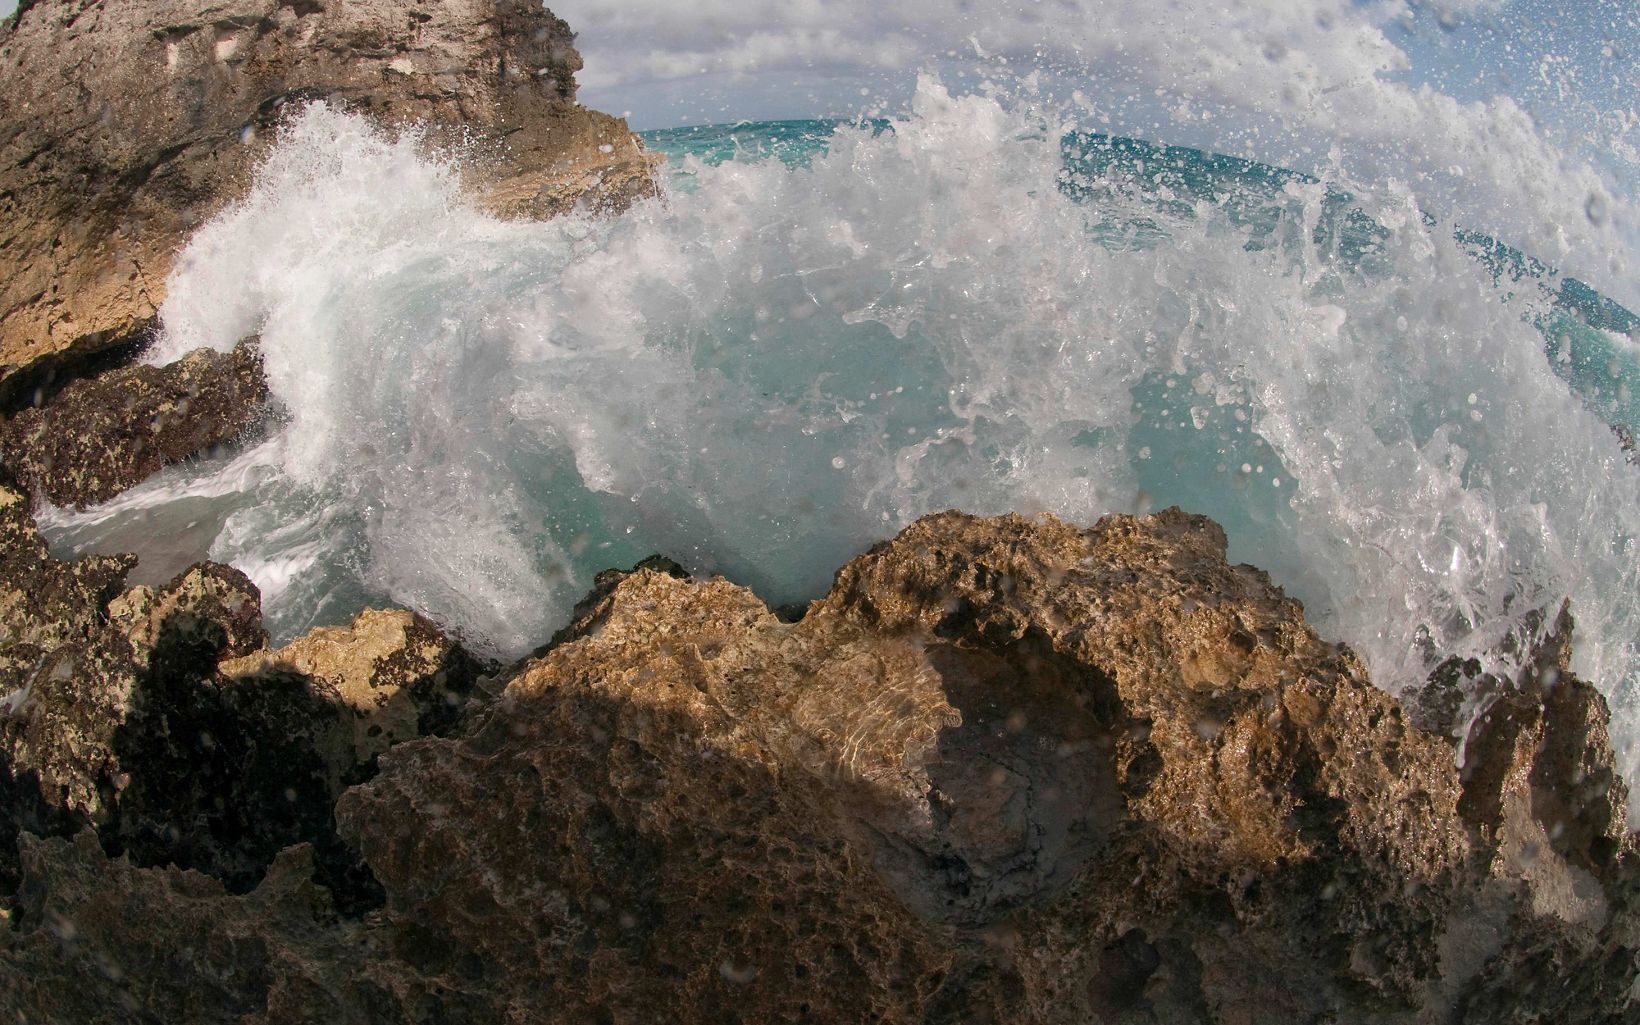 Water splashes against the rocky shore.